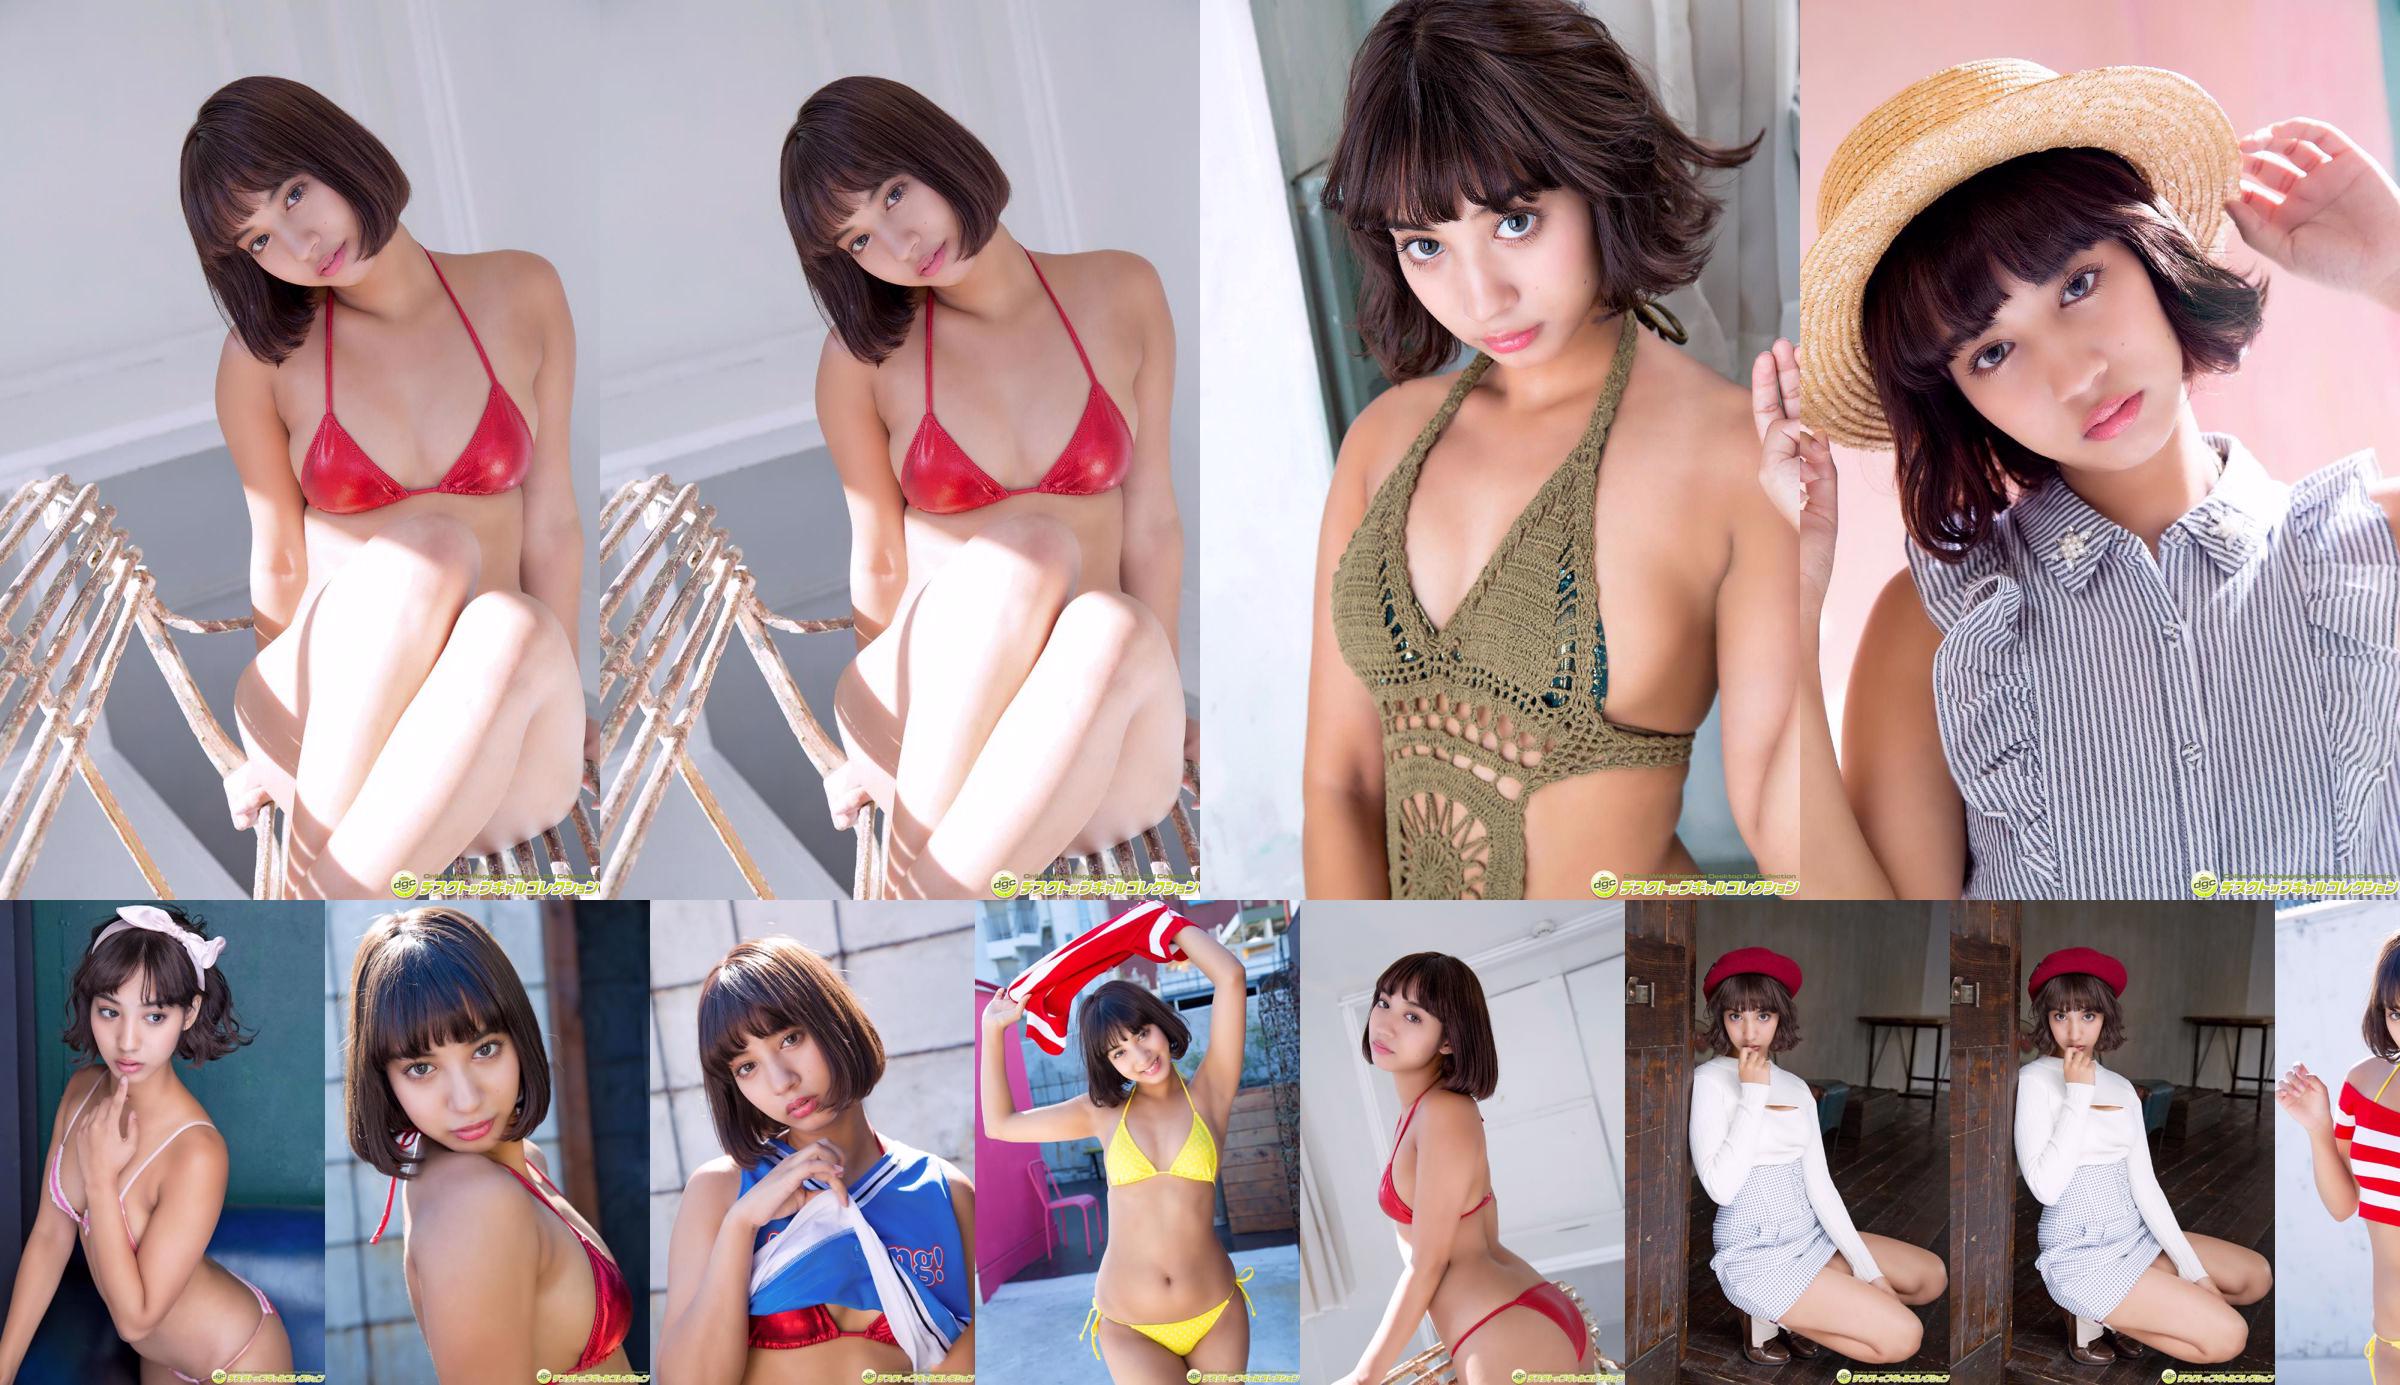 Makino Sagumi ""D-girls2016" Selected 抜メンバーのハーフミュキ" [DGC] No.4ddb4b Page 2